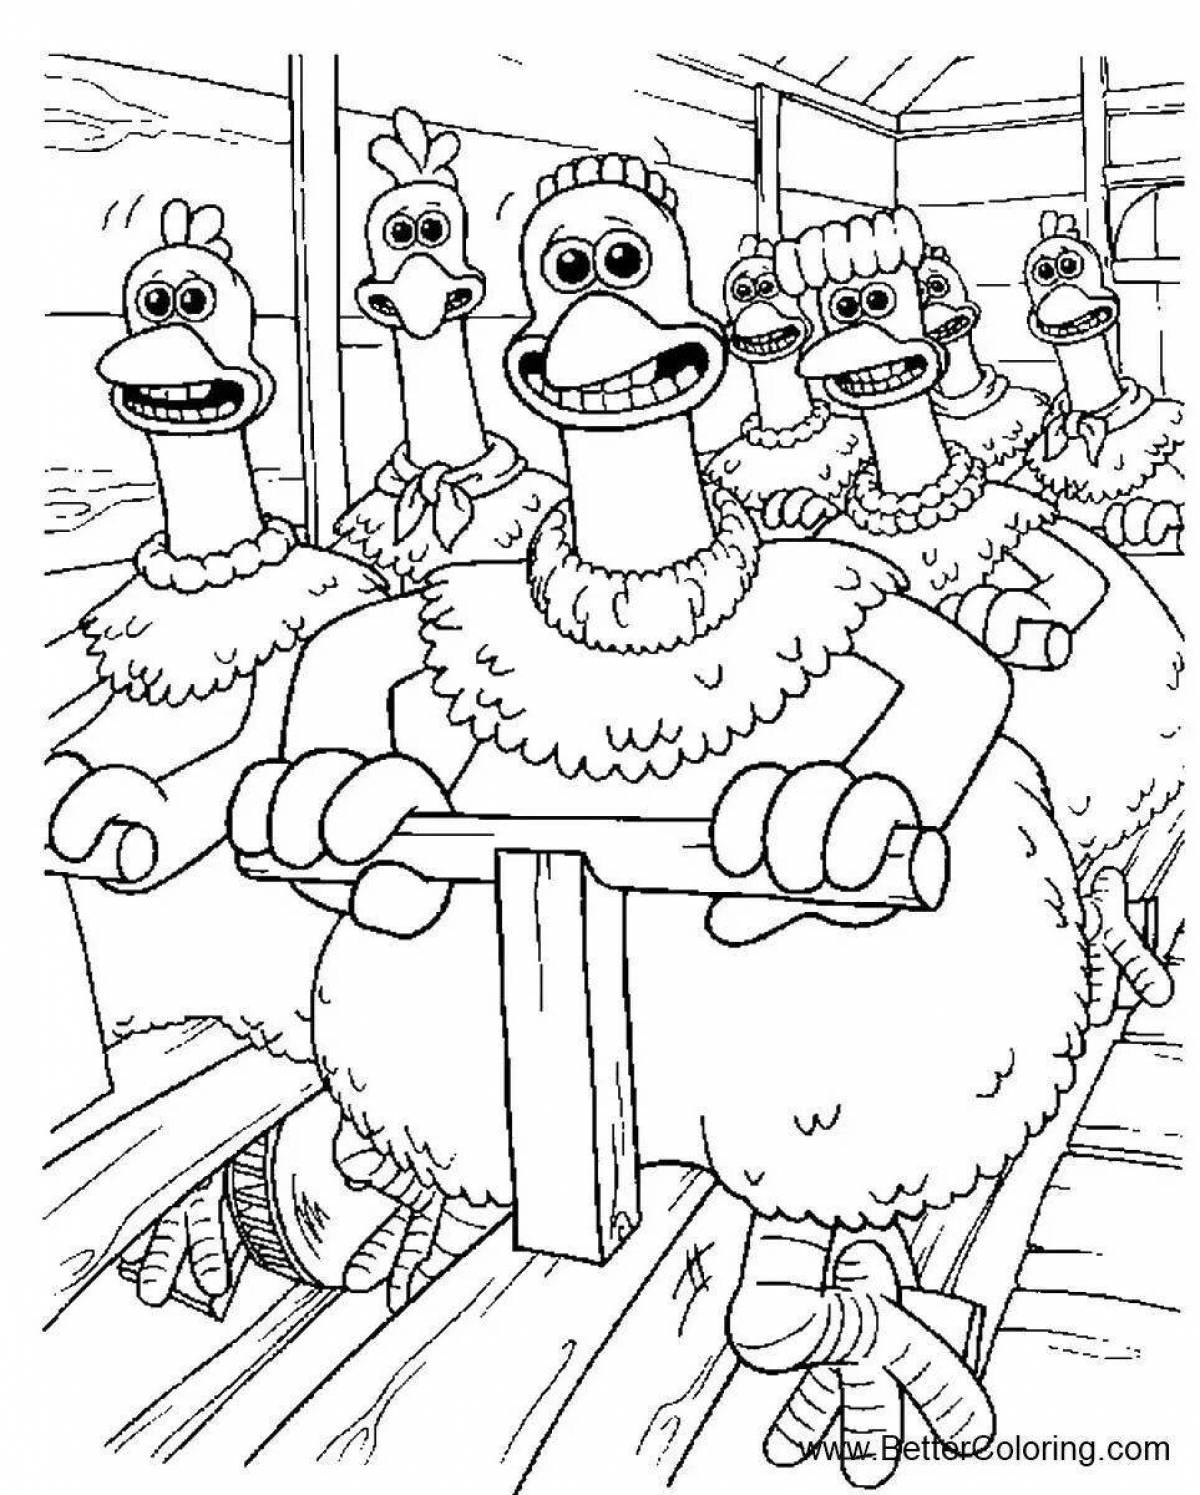 Animated ghana chicken coloring page